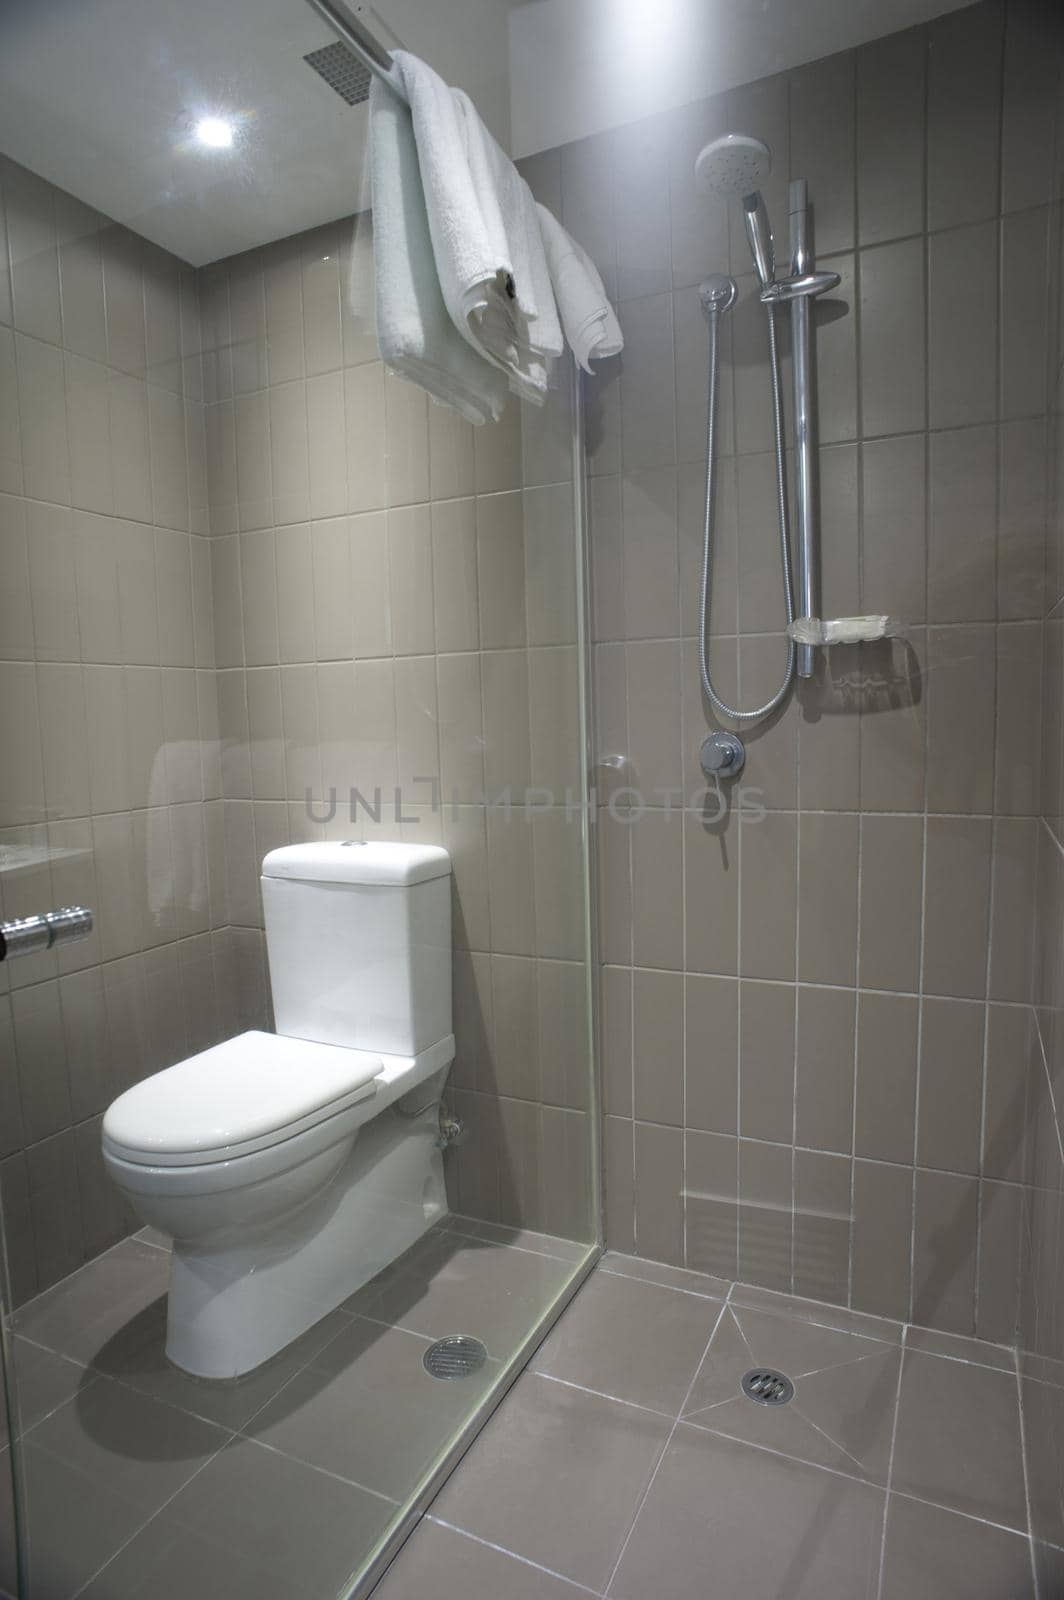 White ceramic toilet fixture and shower in a small bathroom with neutral beige decor and clean white towels